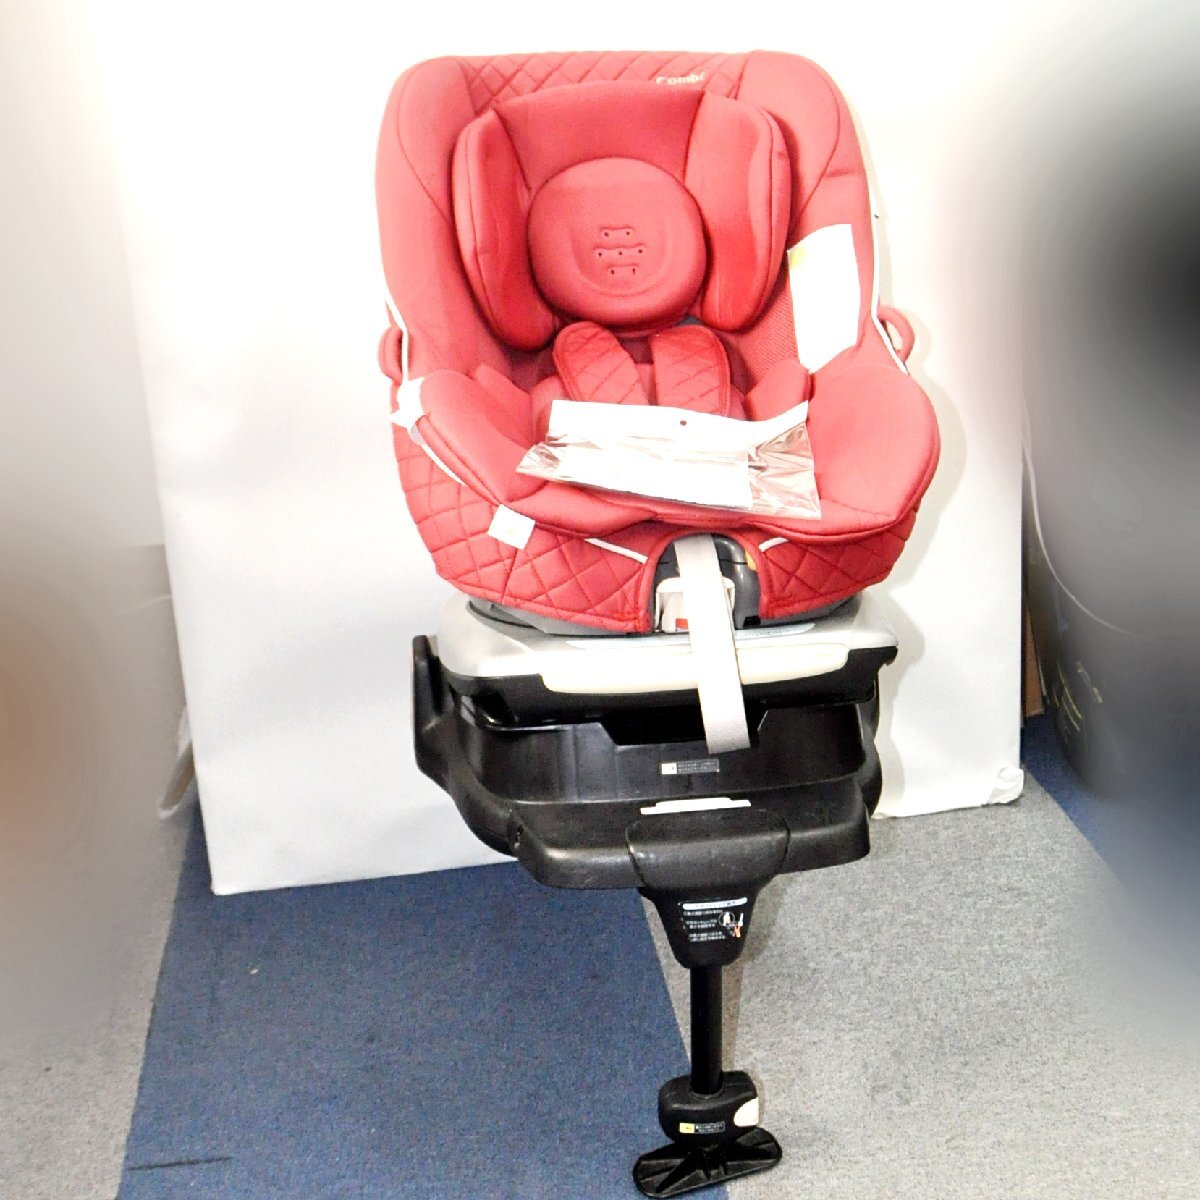  secondhand goods Combi combination child seat laktia Turn series CV-ETY 360 times rotary 